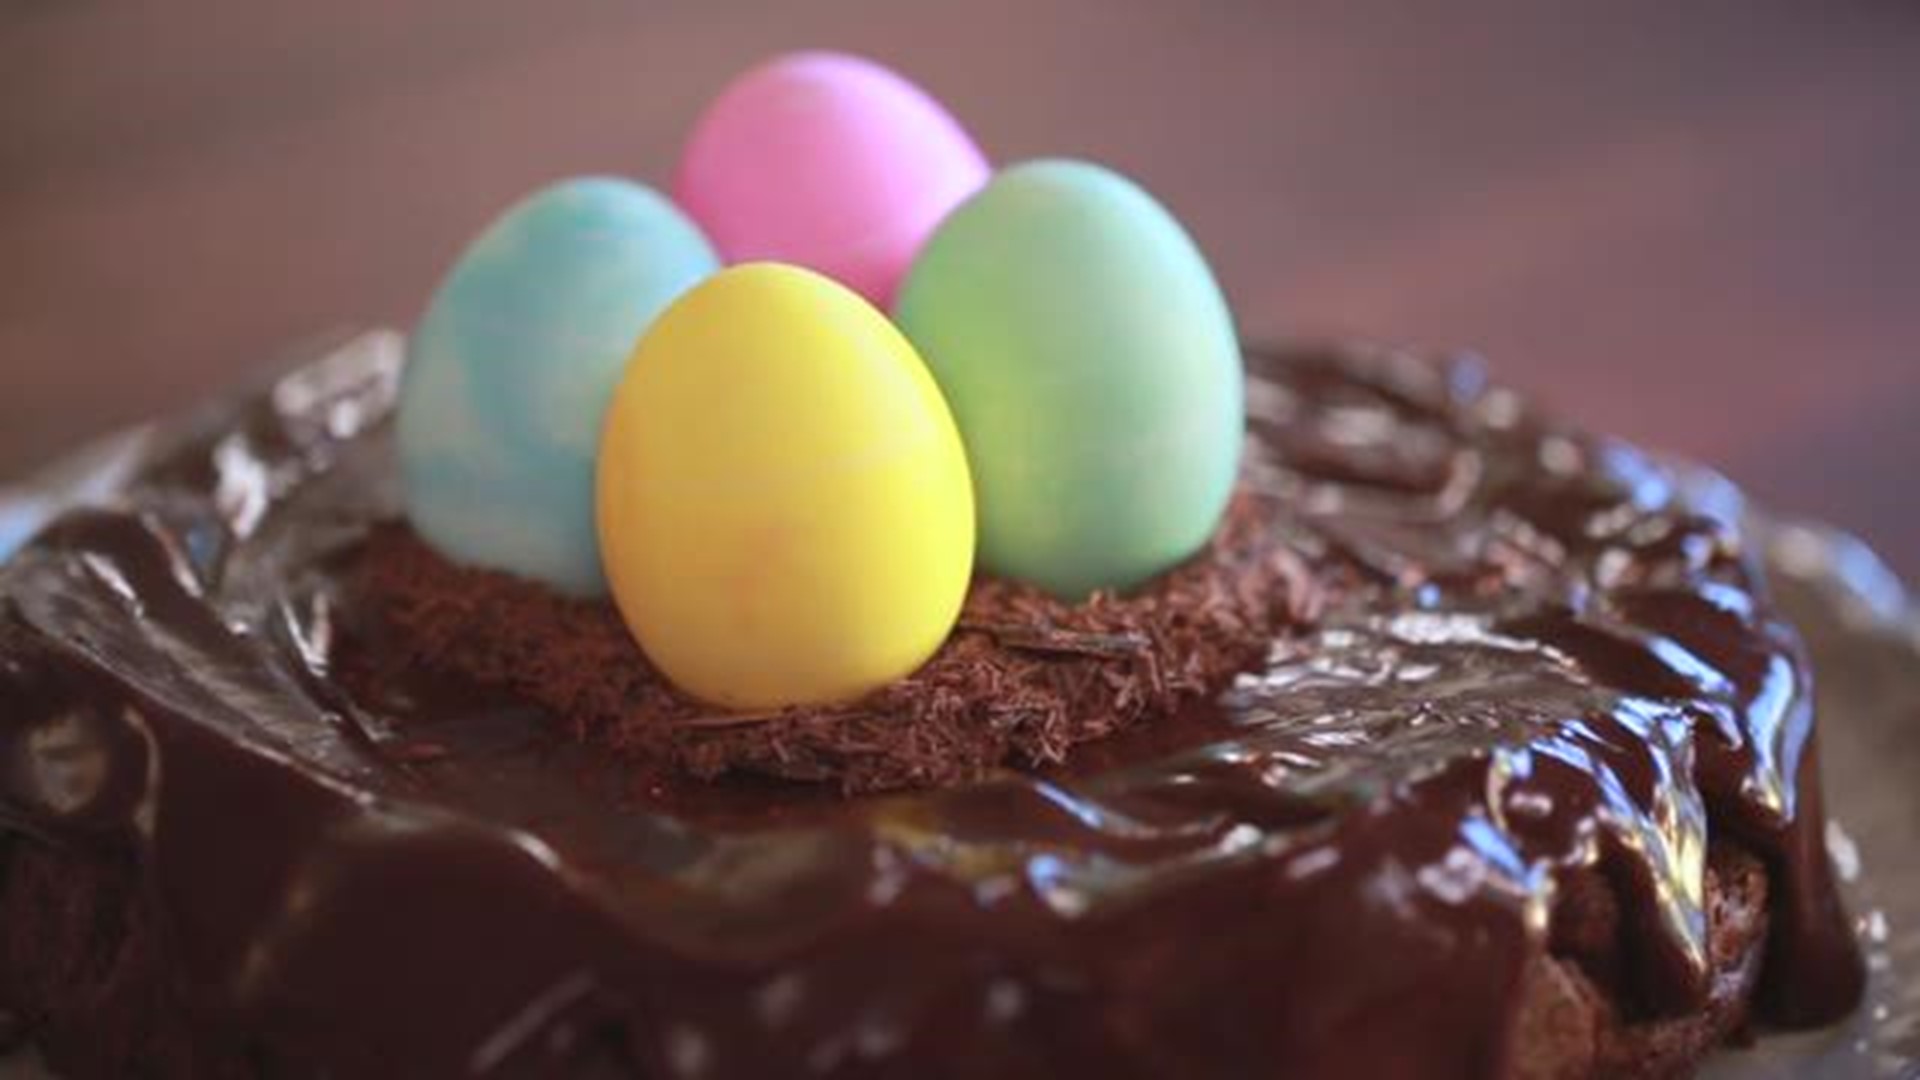 Gemma Stafford's back with a beautiful flourless cake perfect for Easter!